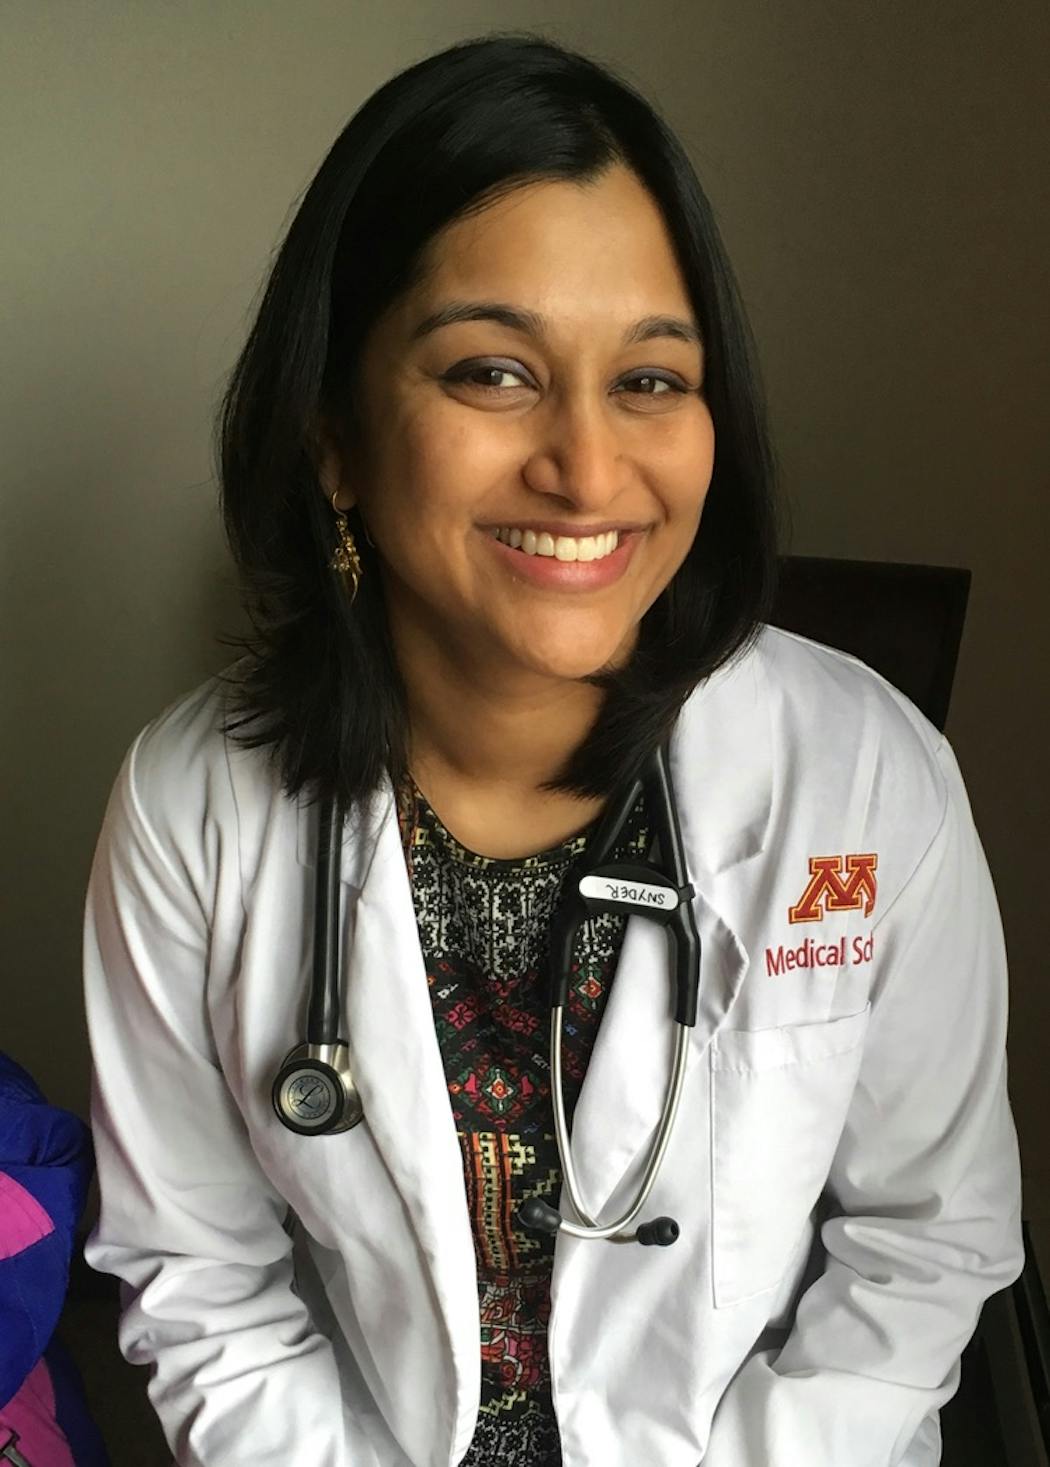 While rearing a toddler, Radhika went on to get her medical degree from the University of Minnesota.